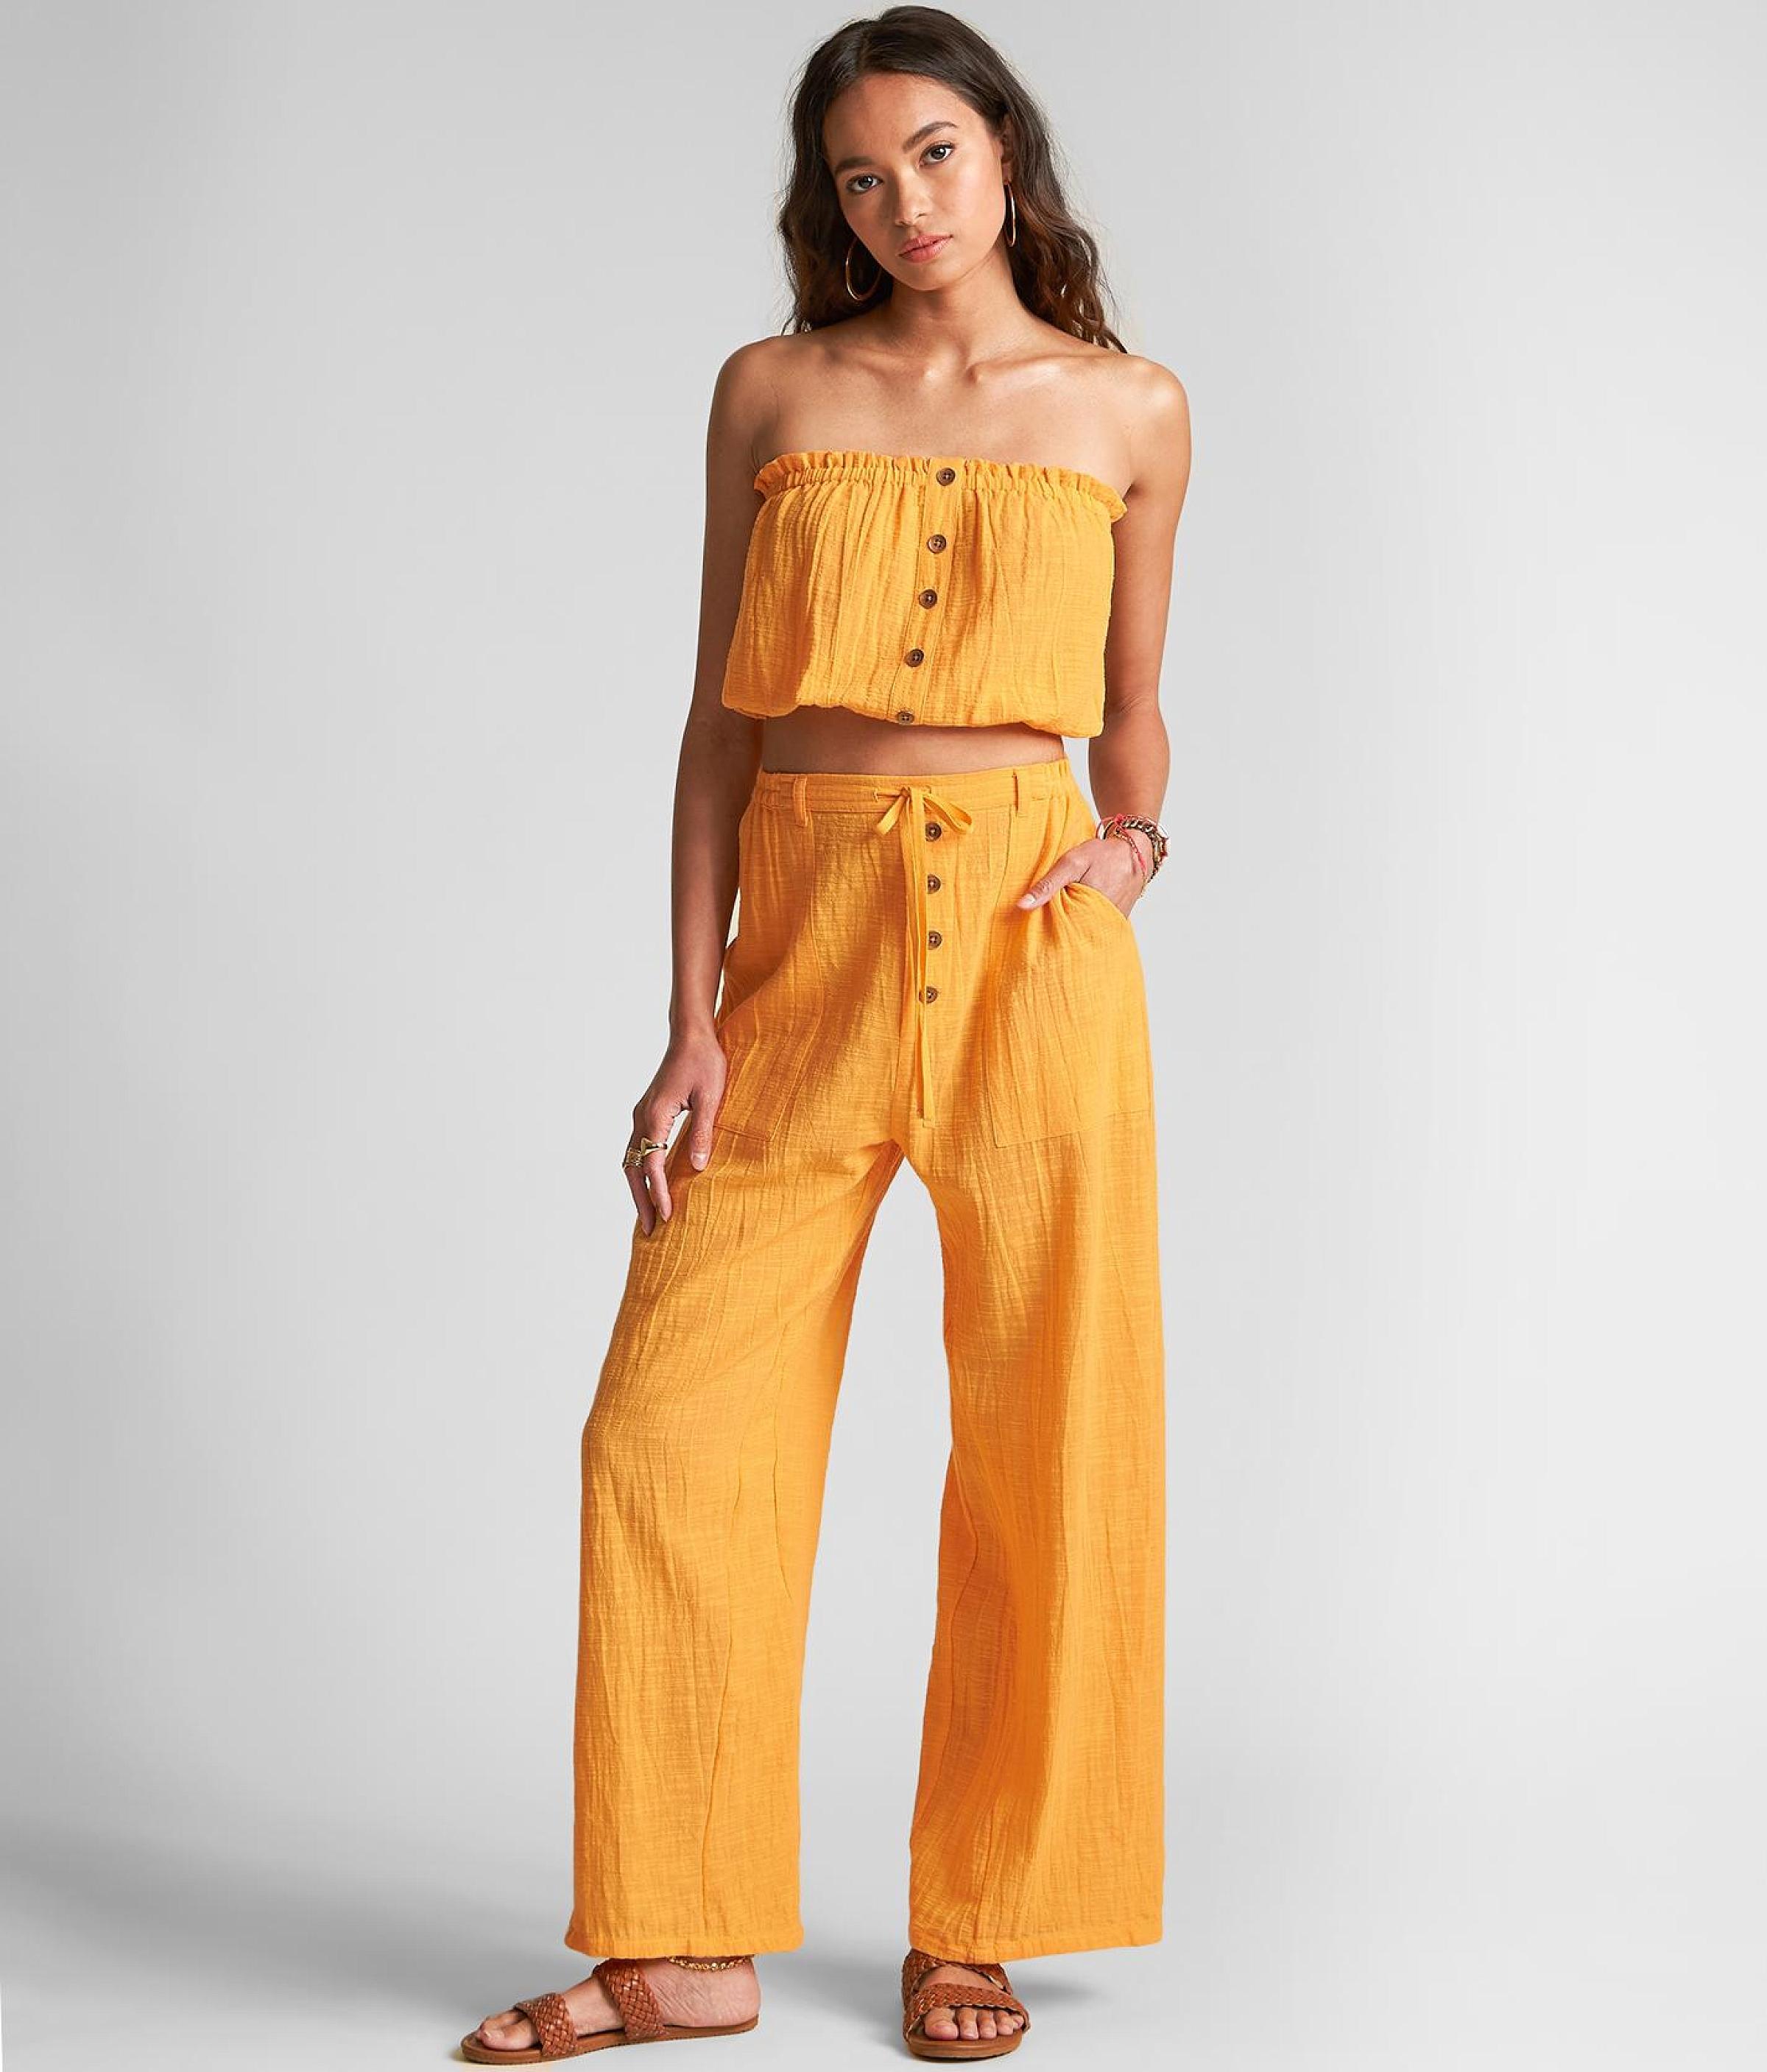 Billabong Sincerely Jules Bring On Wide Leg Pant in Yellow | Lyst